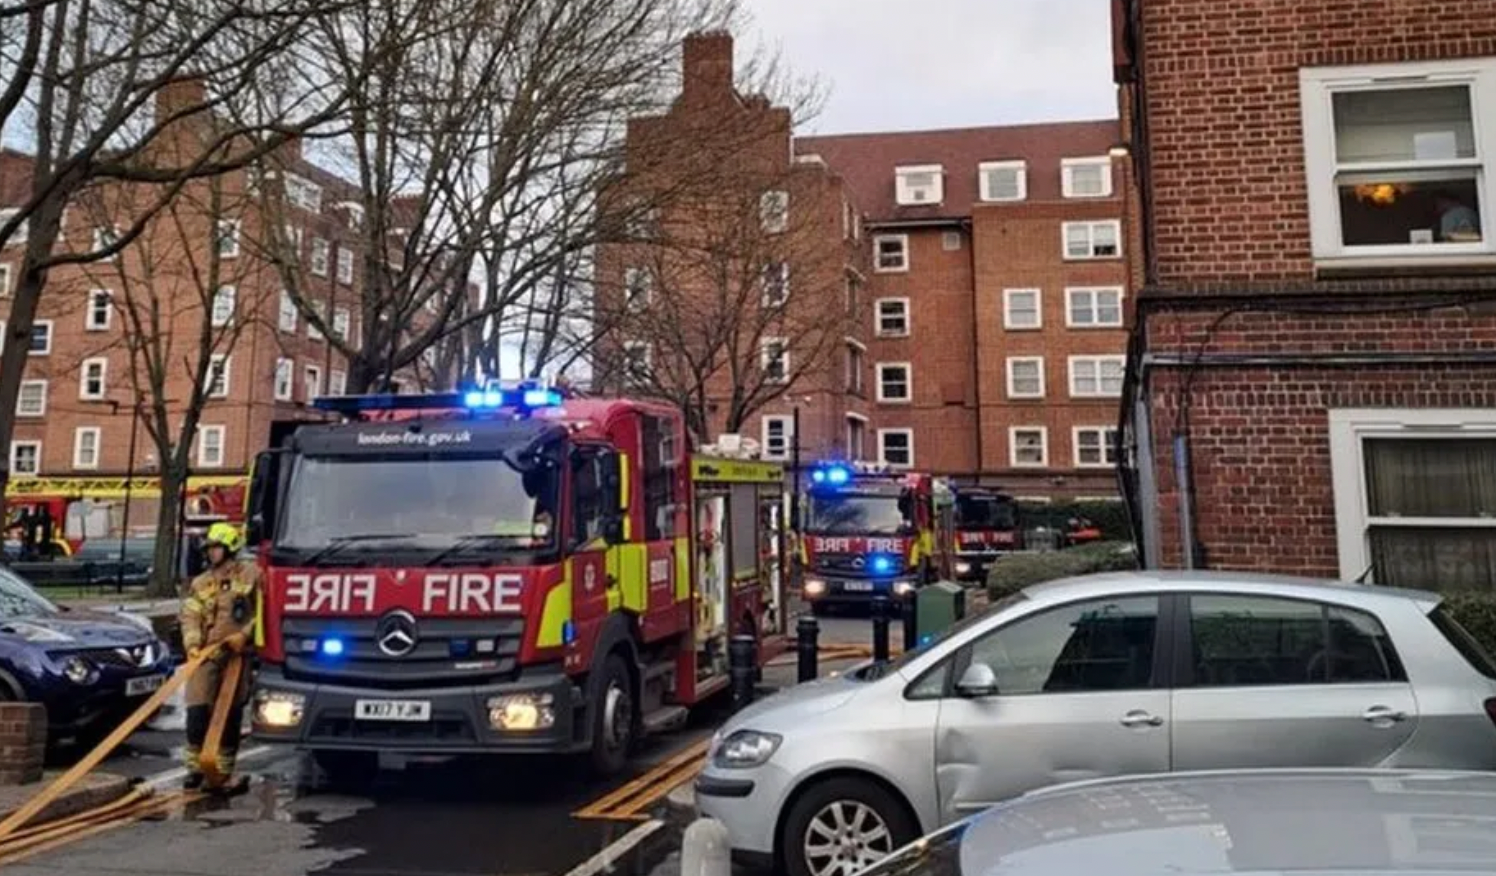 The London Fire Brigade at the scene of the incident in Hackney